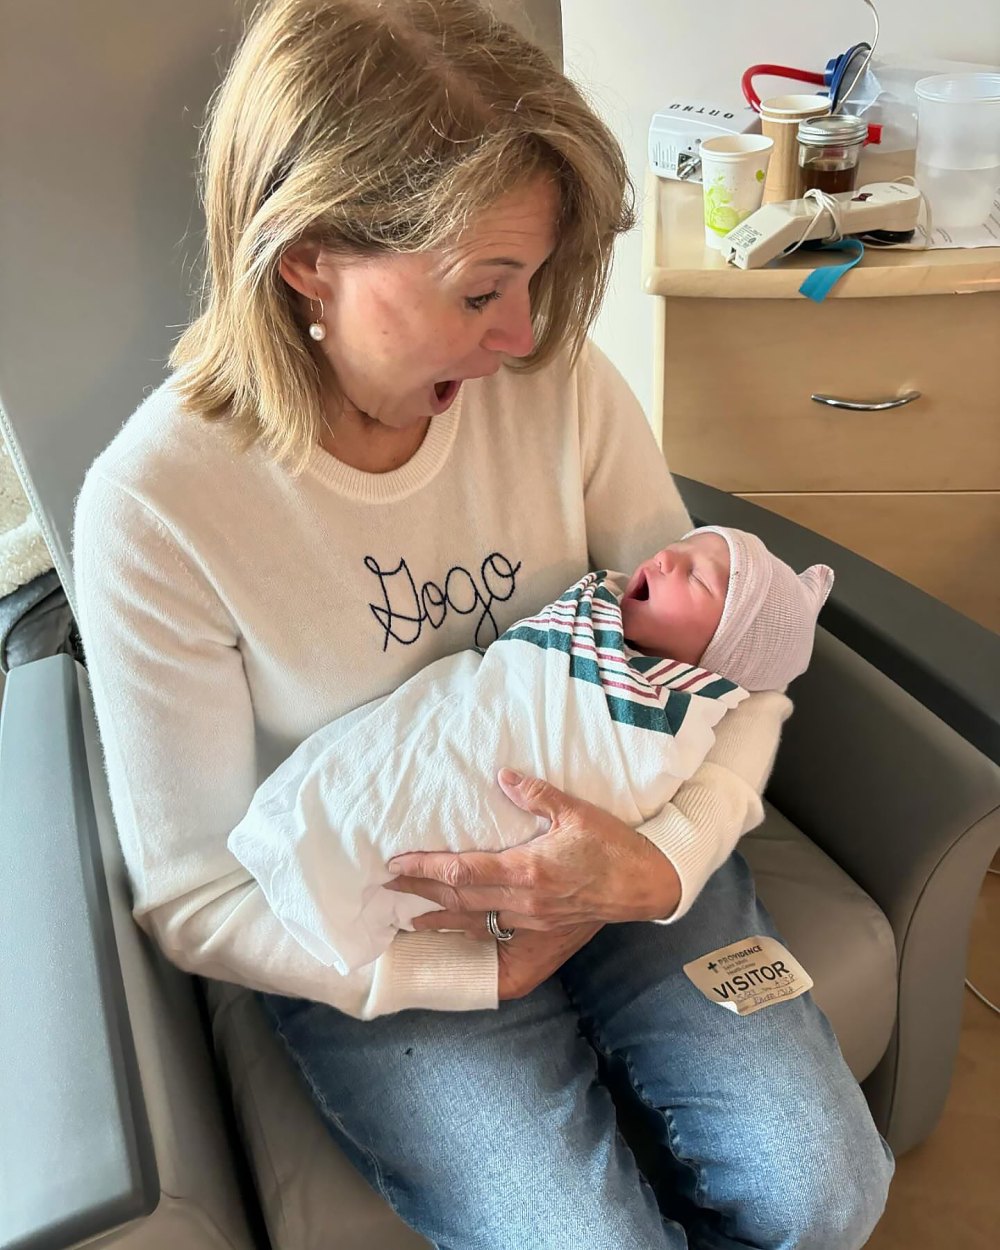 Katie Couric eldest daughter Ellie Monahan welcomed first child with husband Mark Dobrosky 2